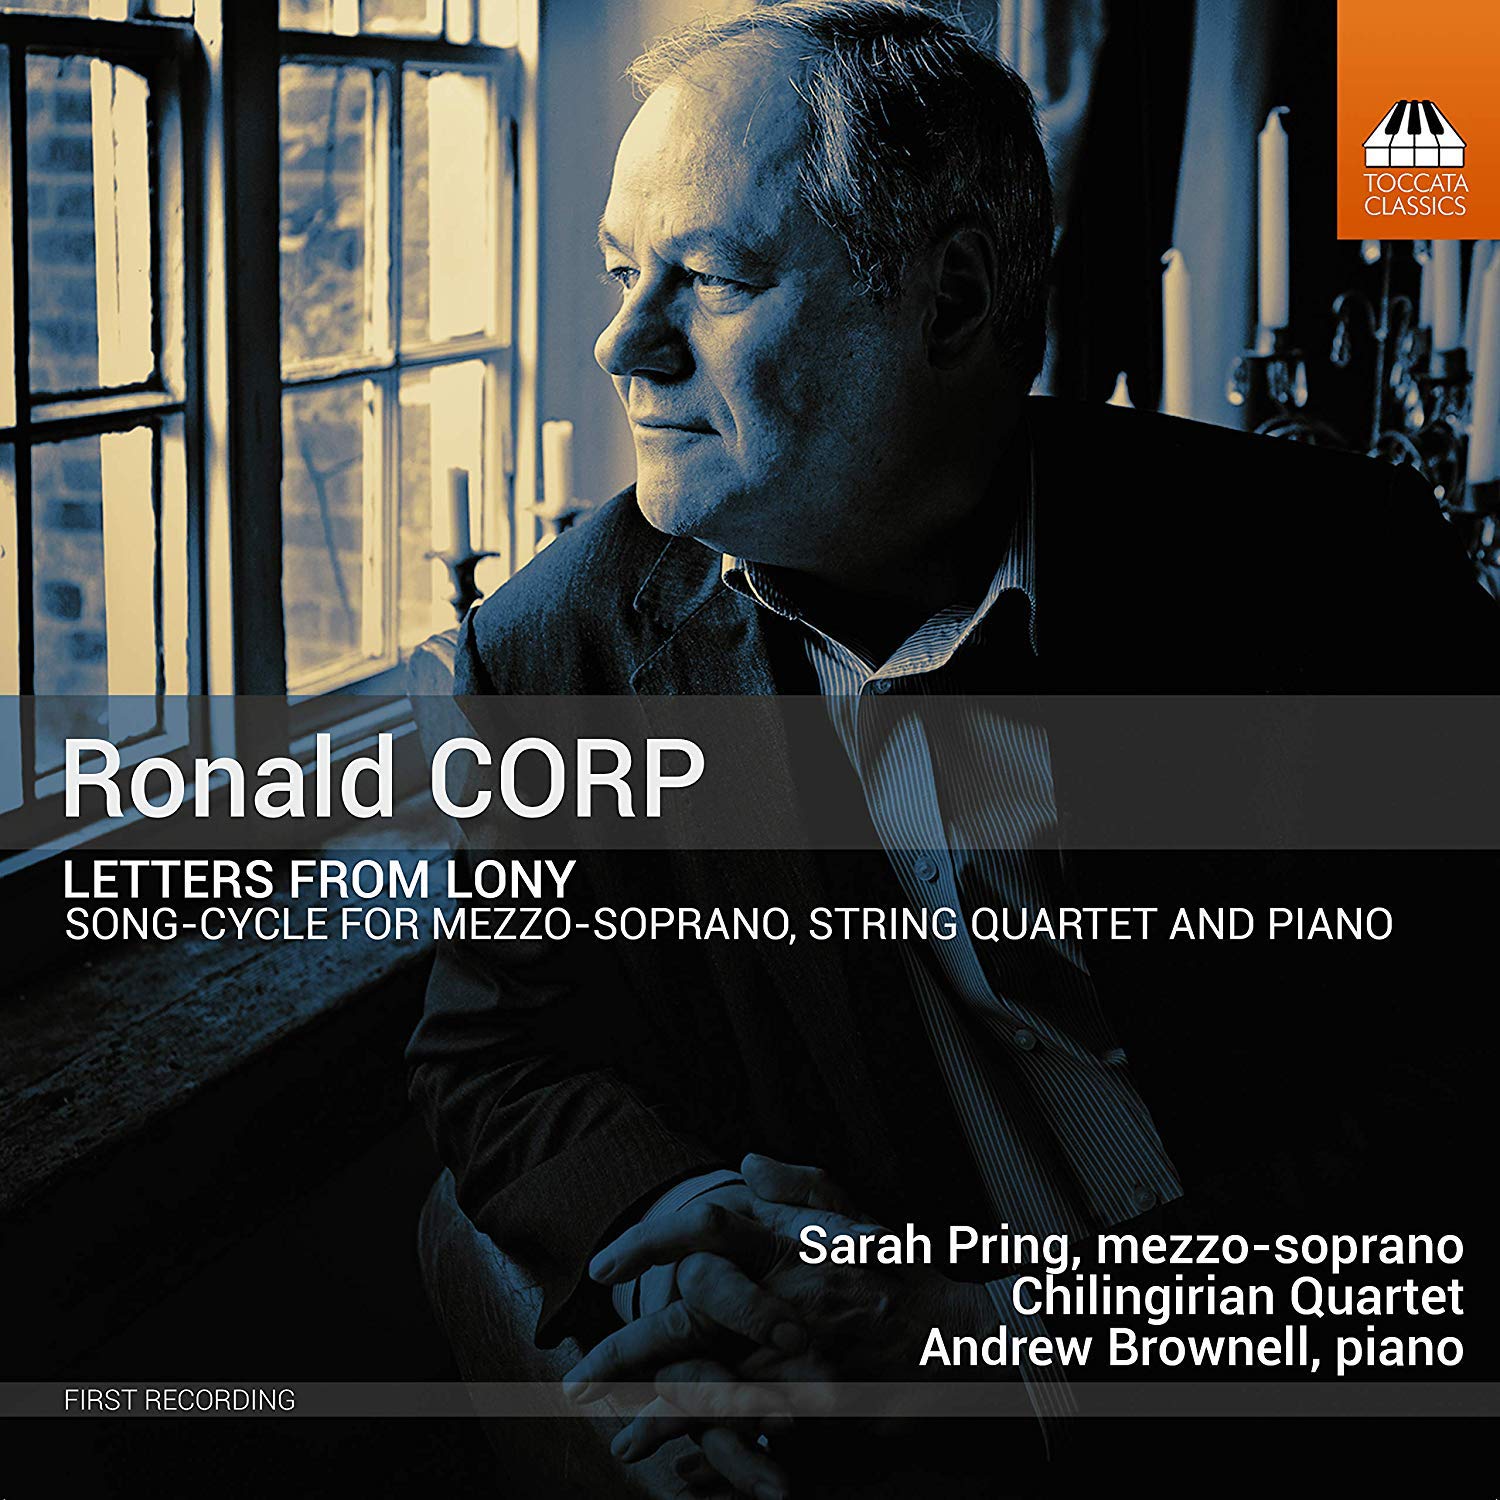 Andrew Brownell, Chilingirian Quartet, Sarah Pring - Ronald Corp: Letters from Lony (2019) [FLAC 24bit/96kHz]